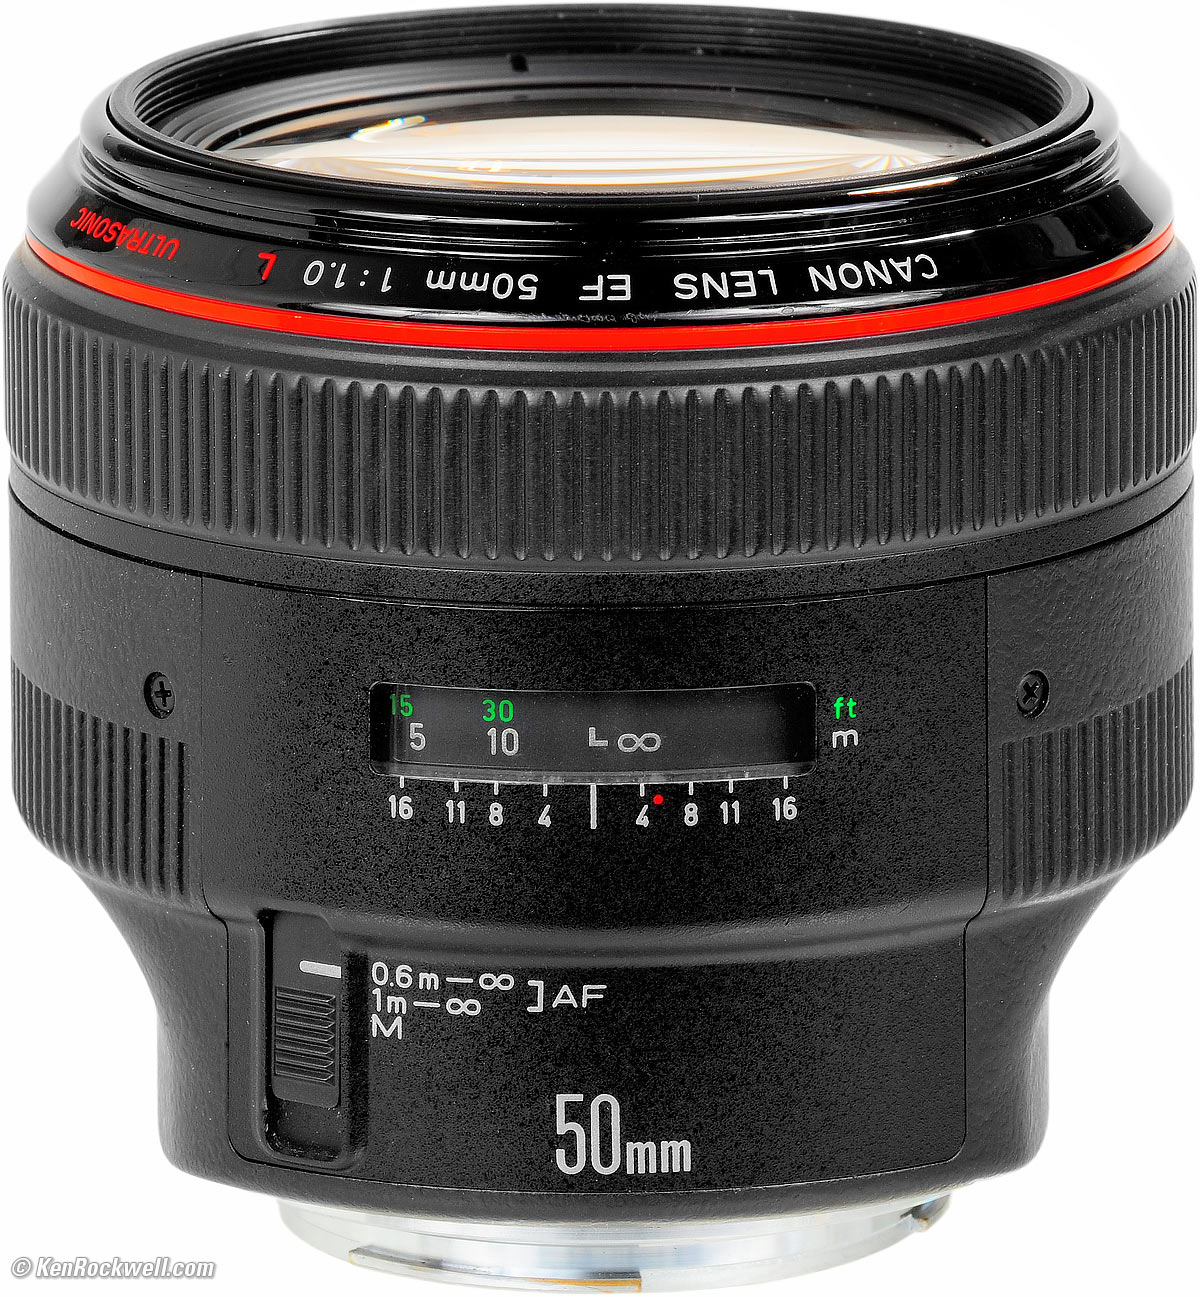 Canon 50mm 1.8 LTM - mainly at night - Photo Thinking - Lens Review